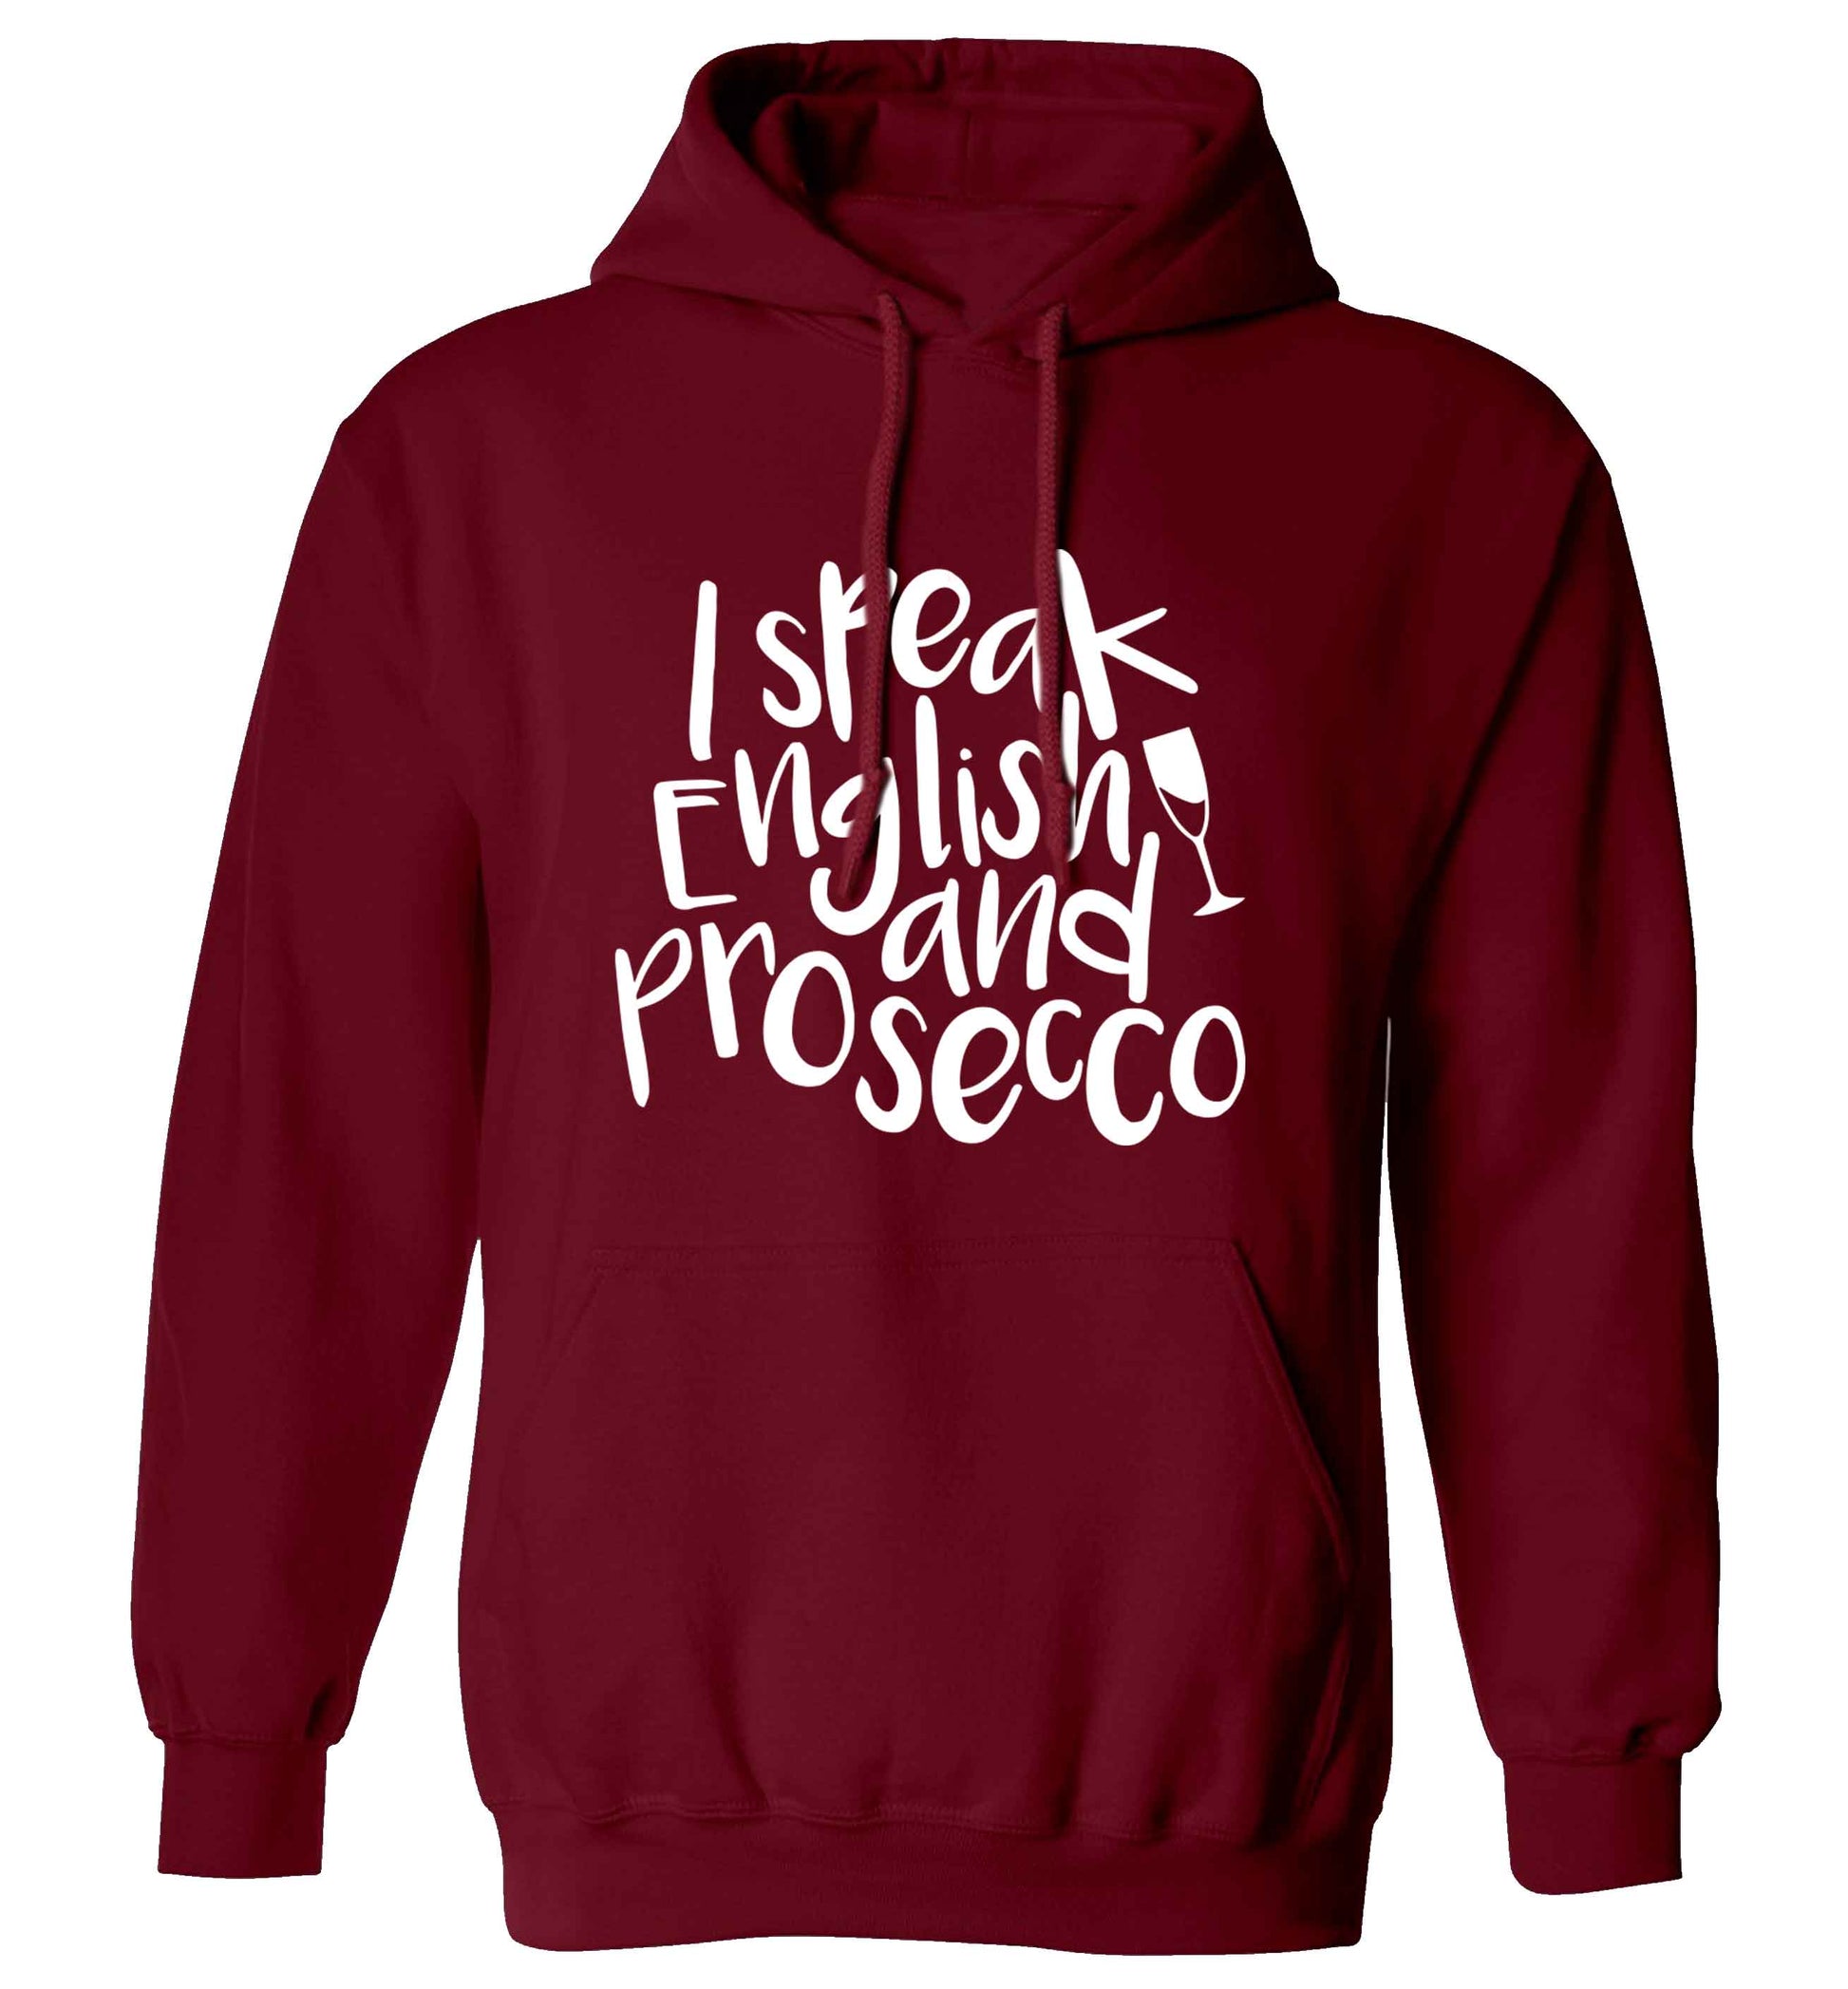 I speak English and prosecco adults unisex maroon hoodie 2XL